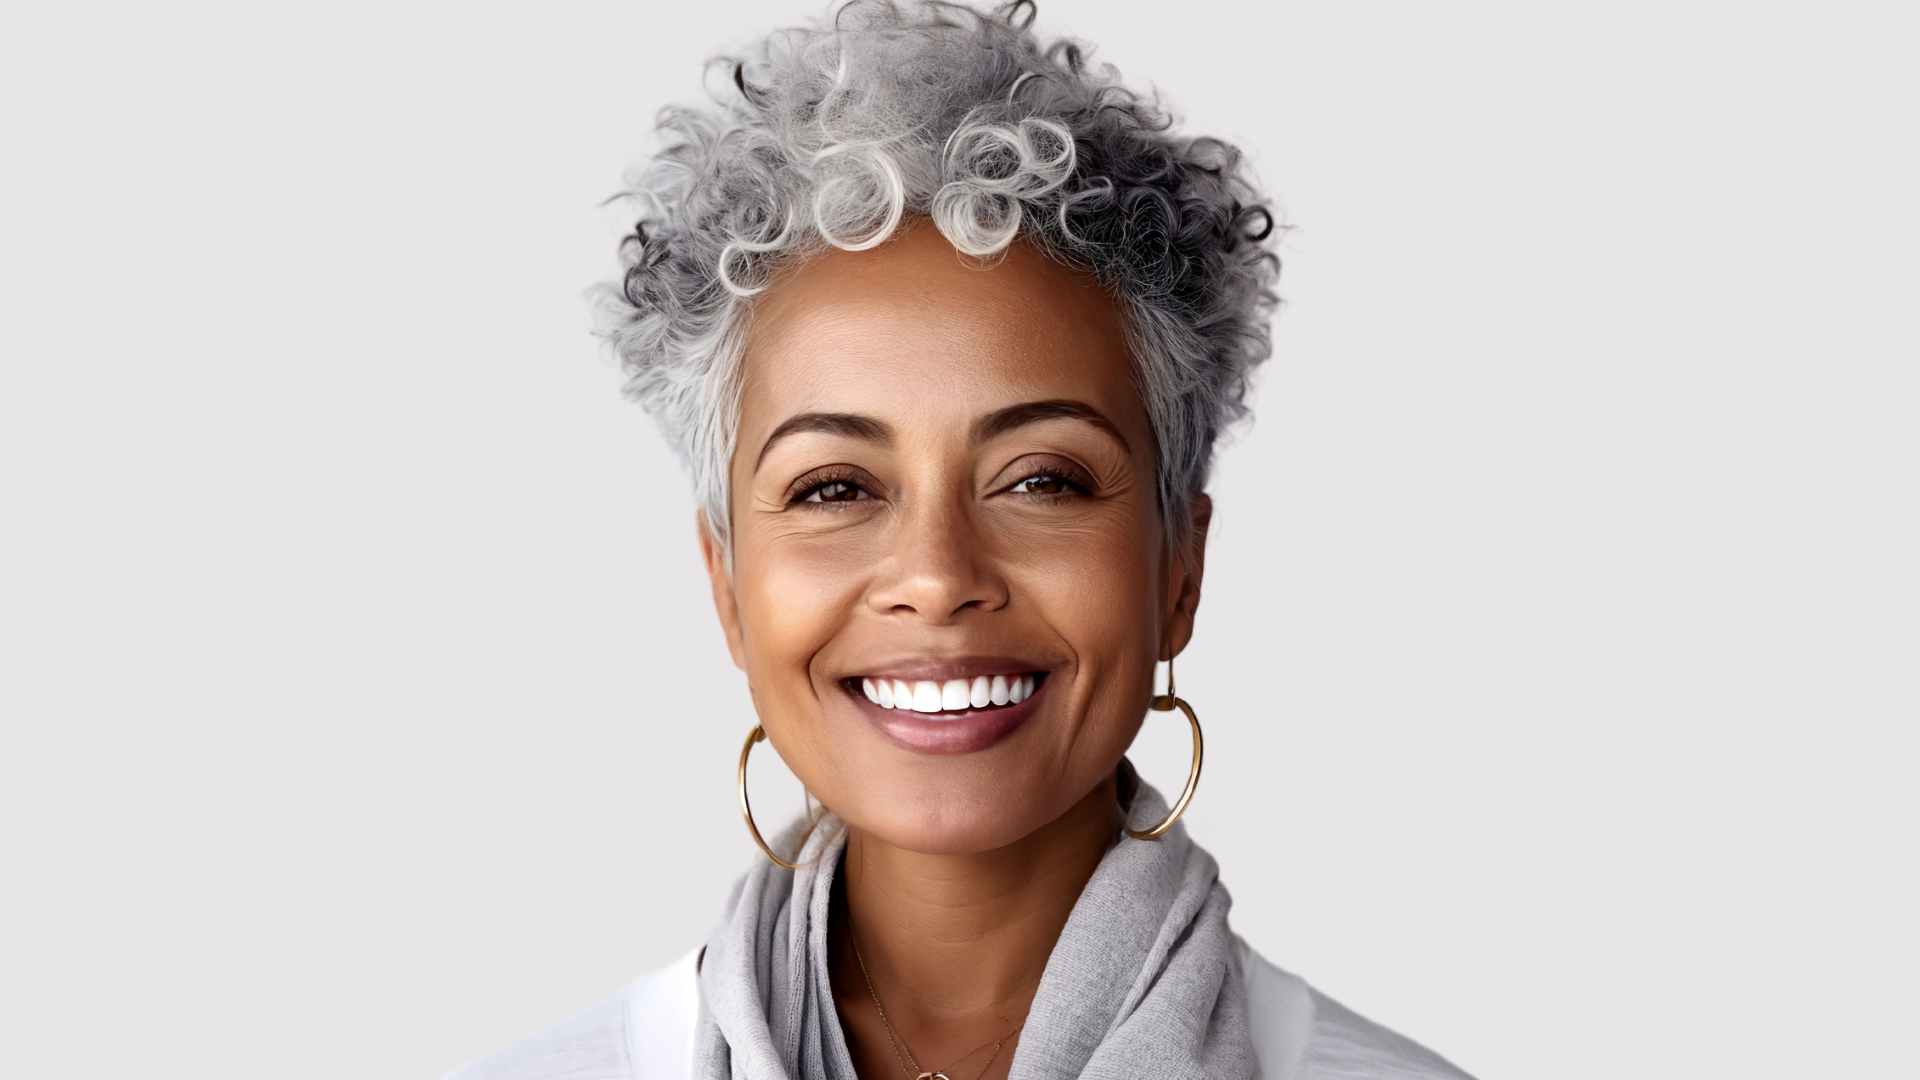 Short, curly grey hair with length on top